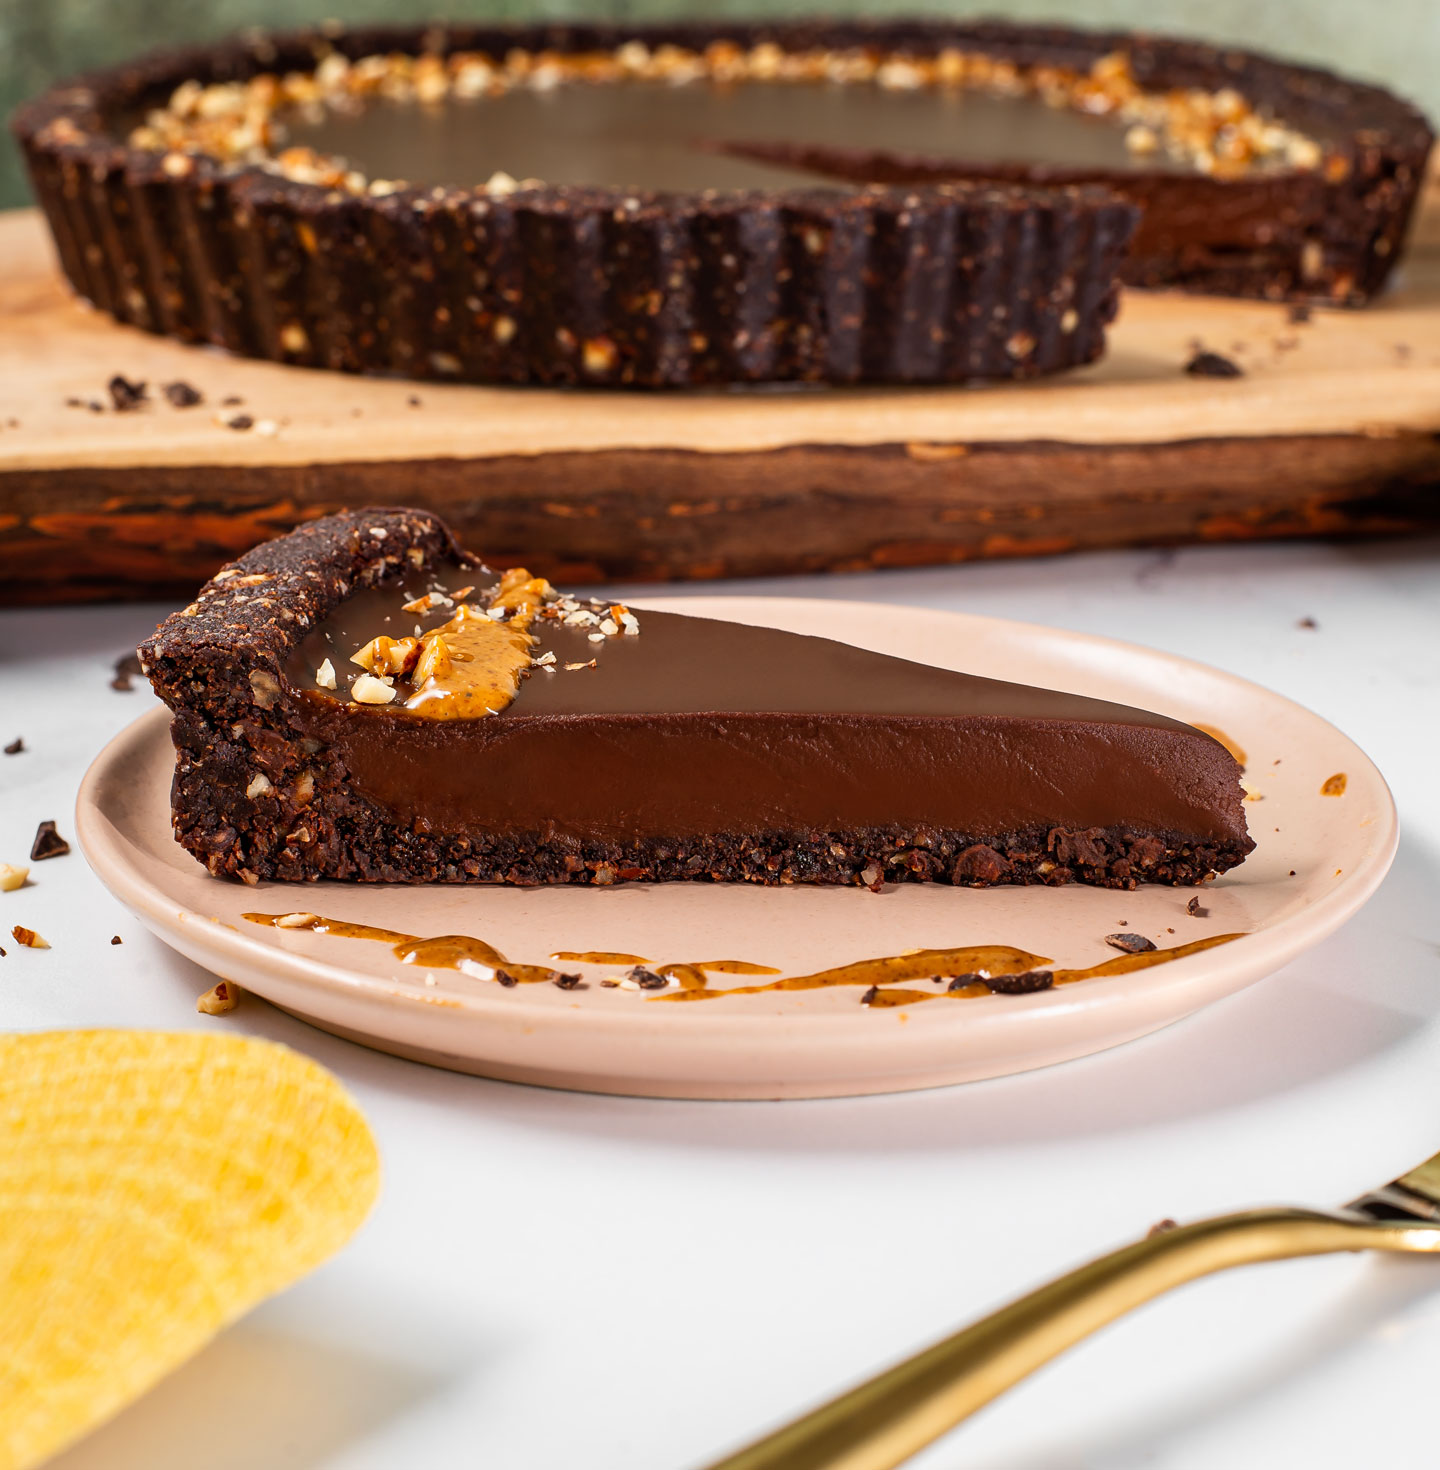 A slice of vegan chocolate almond tart sits on a plate. The chocolate ganache filling is soft but fully set. The crust holds firm and the slice is decorated with an almond butter drizzle.